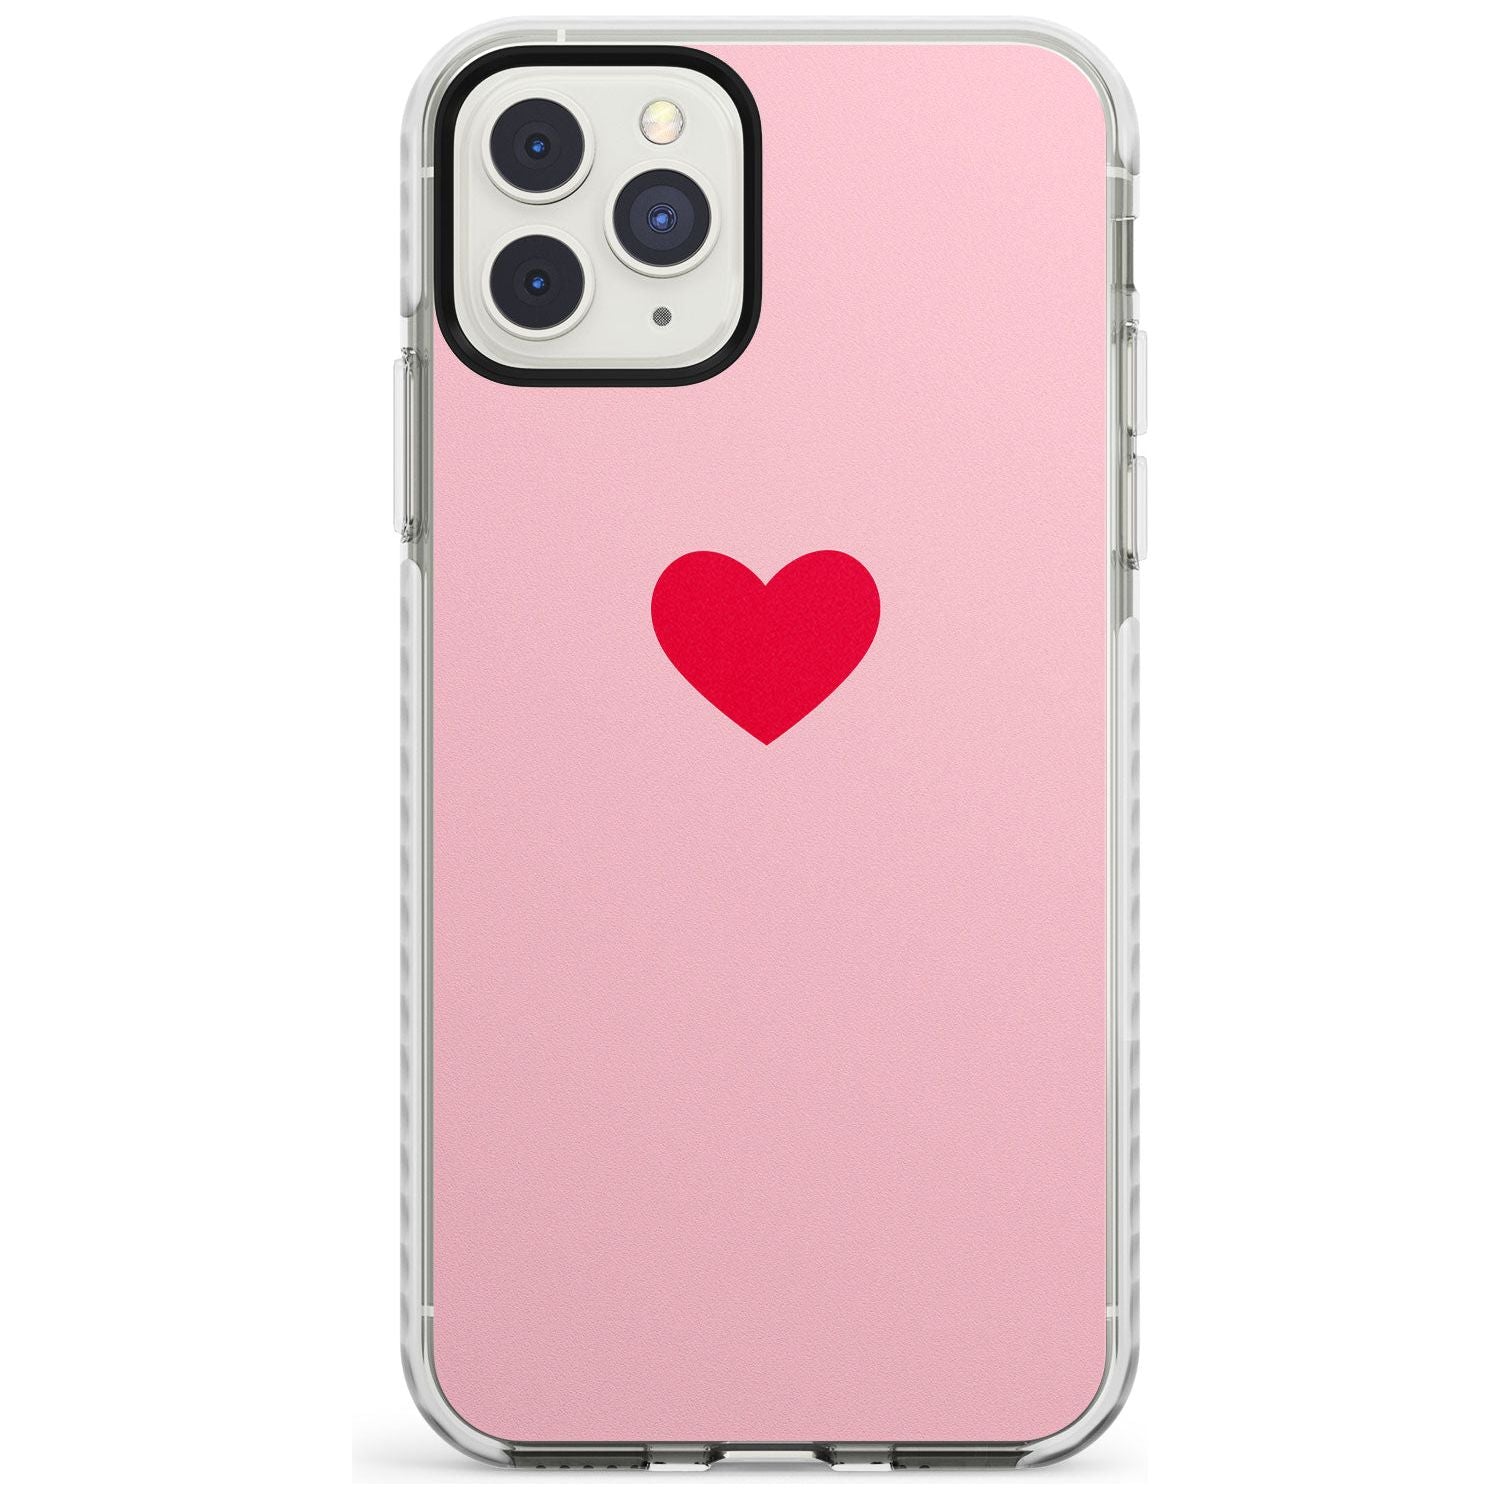 Single Heart Red & Pink Impact Phone Case for iPhone 11 Pro Max